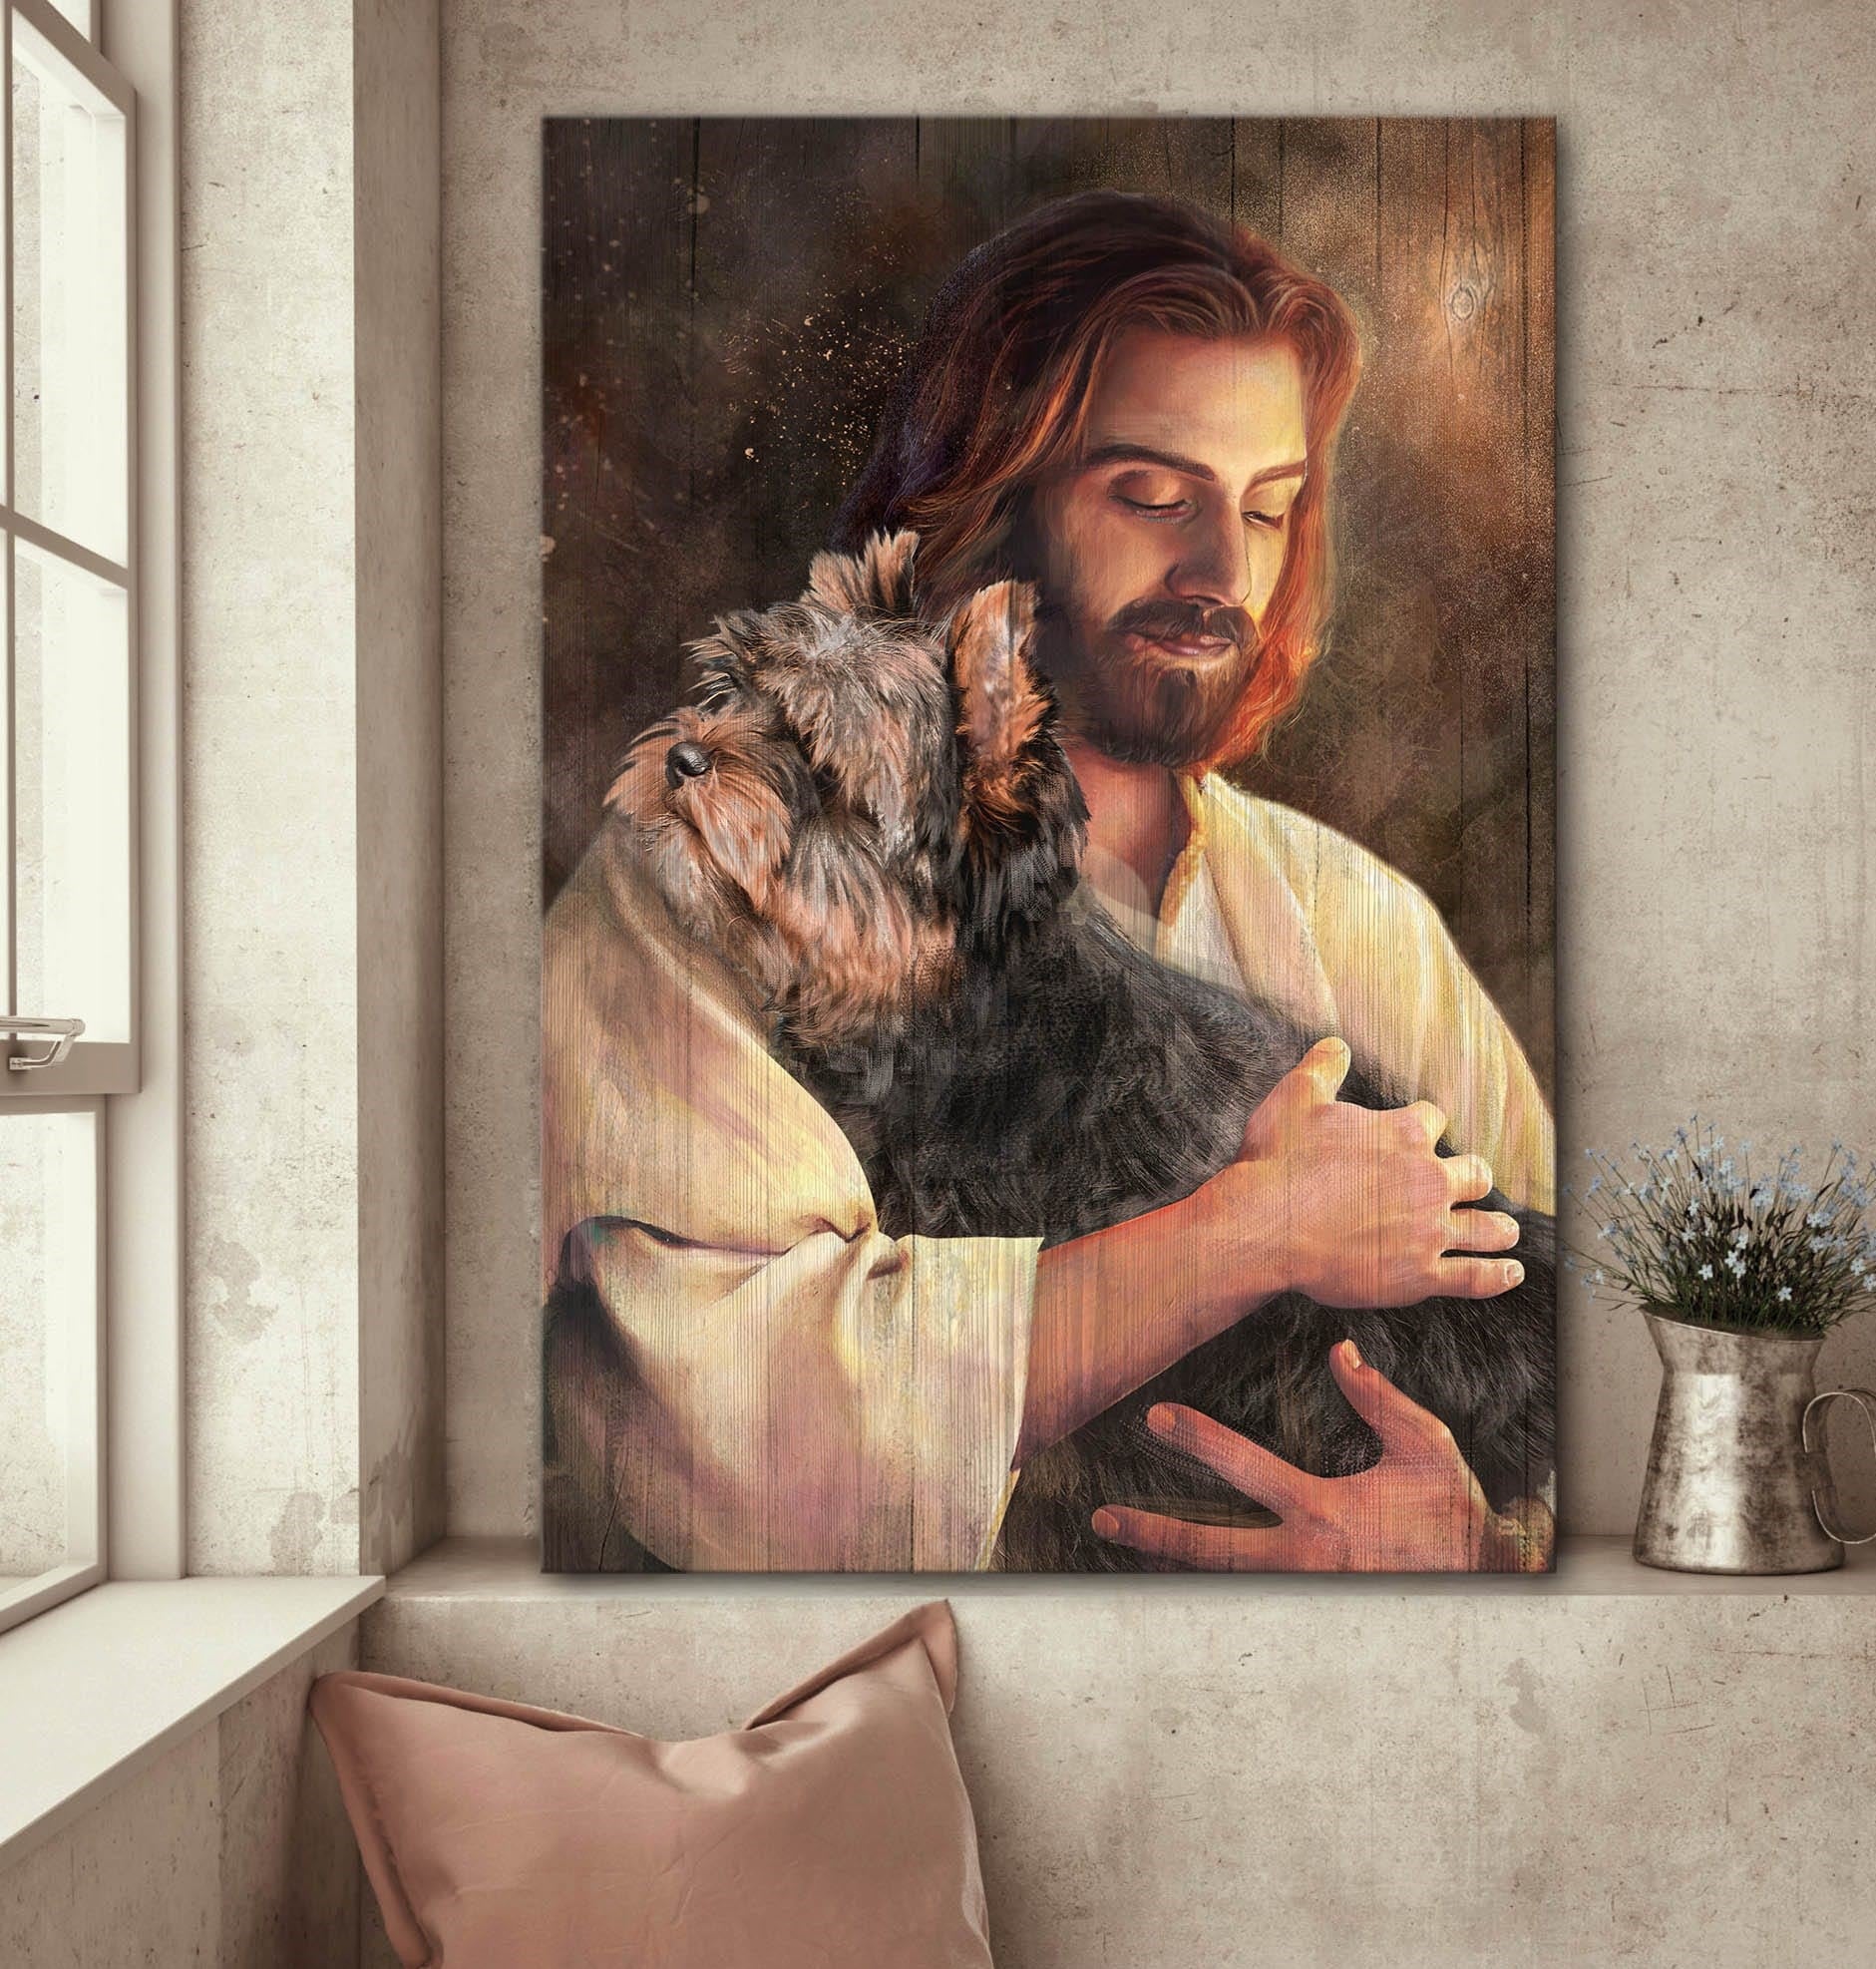 Yorkshire Terrier Dog Portrait Canvas - Yorkshire Terrier, In His Arms, Jesus Painting Canvas - Gift For Yorkshire Terrier, Dog Lovers